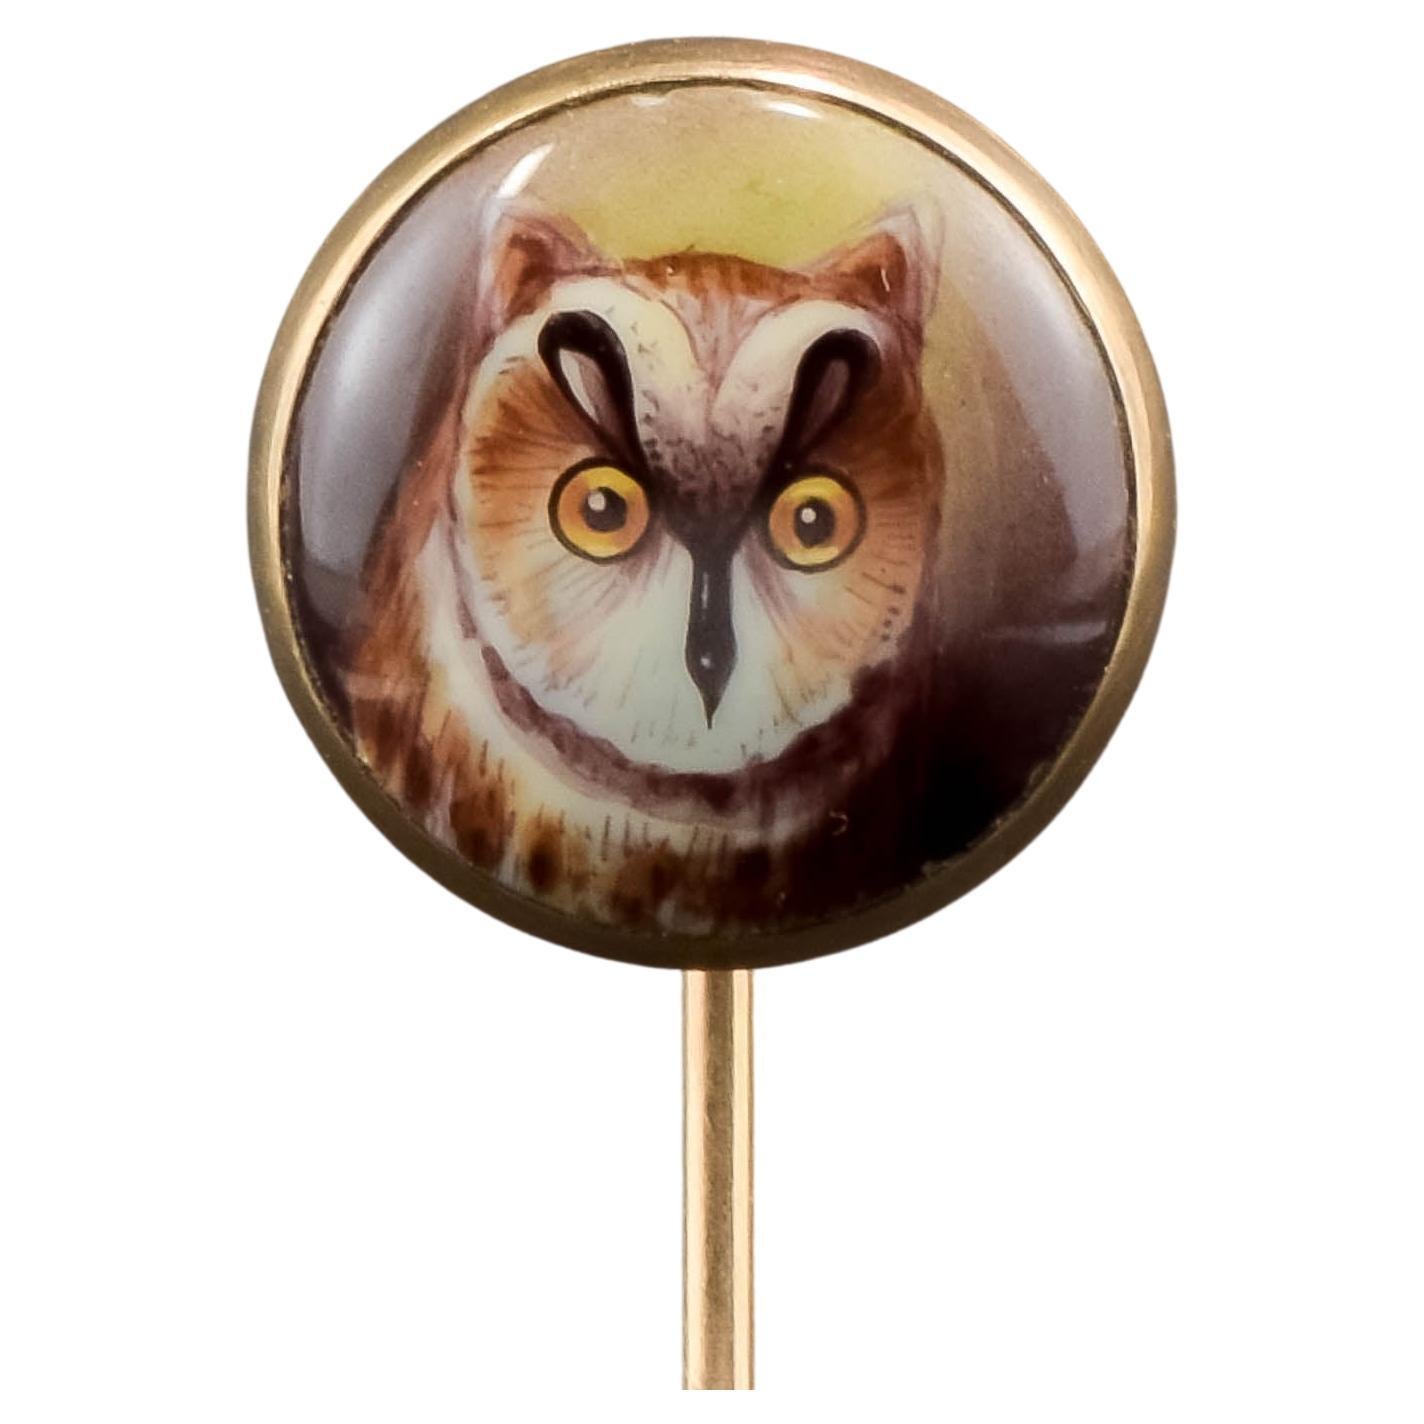 Antique Hand Painted Owl Portrait Stick Pin - Cravat Pin in Gold